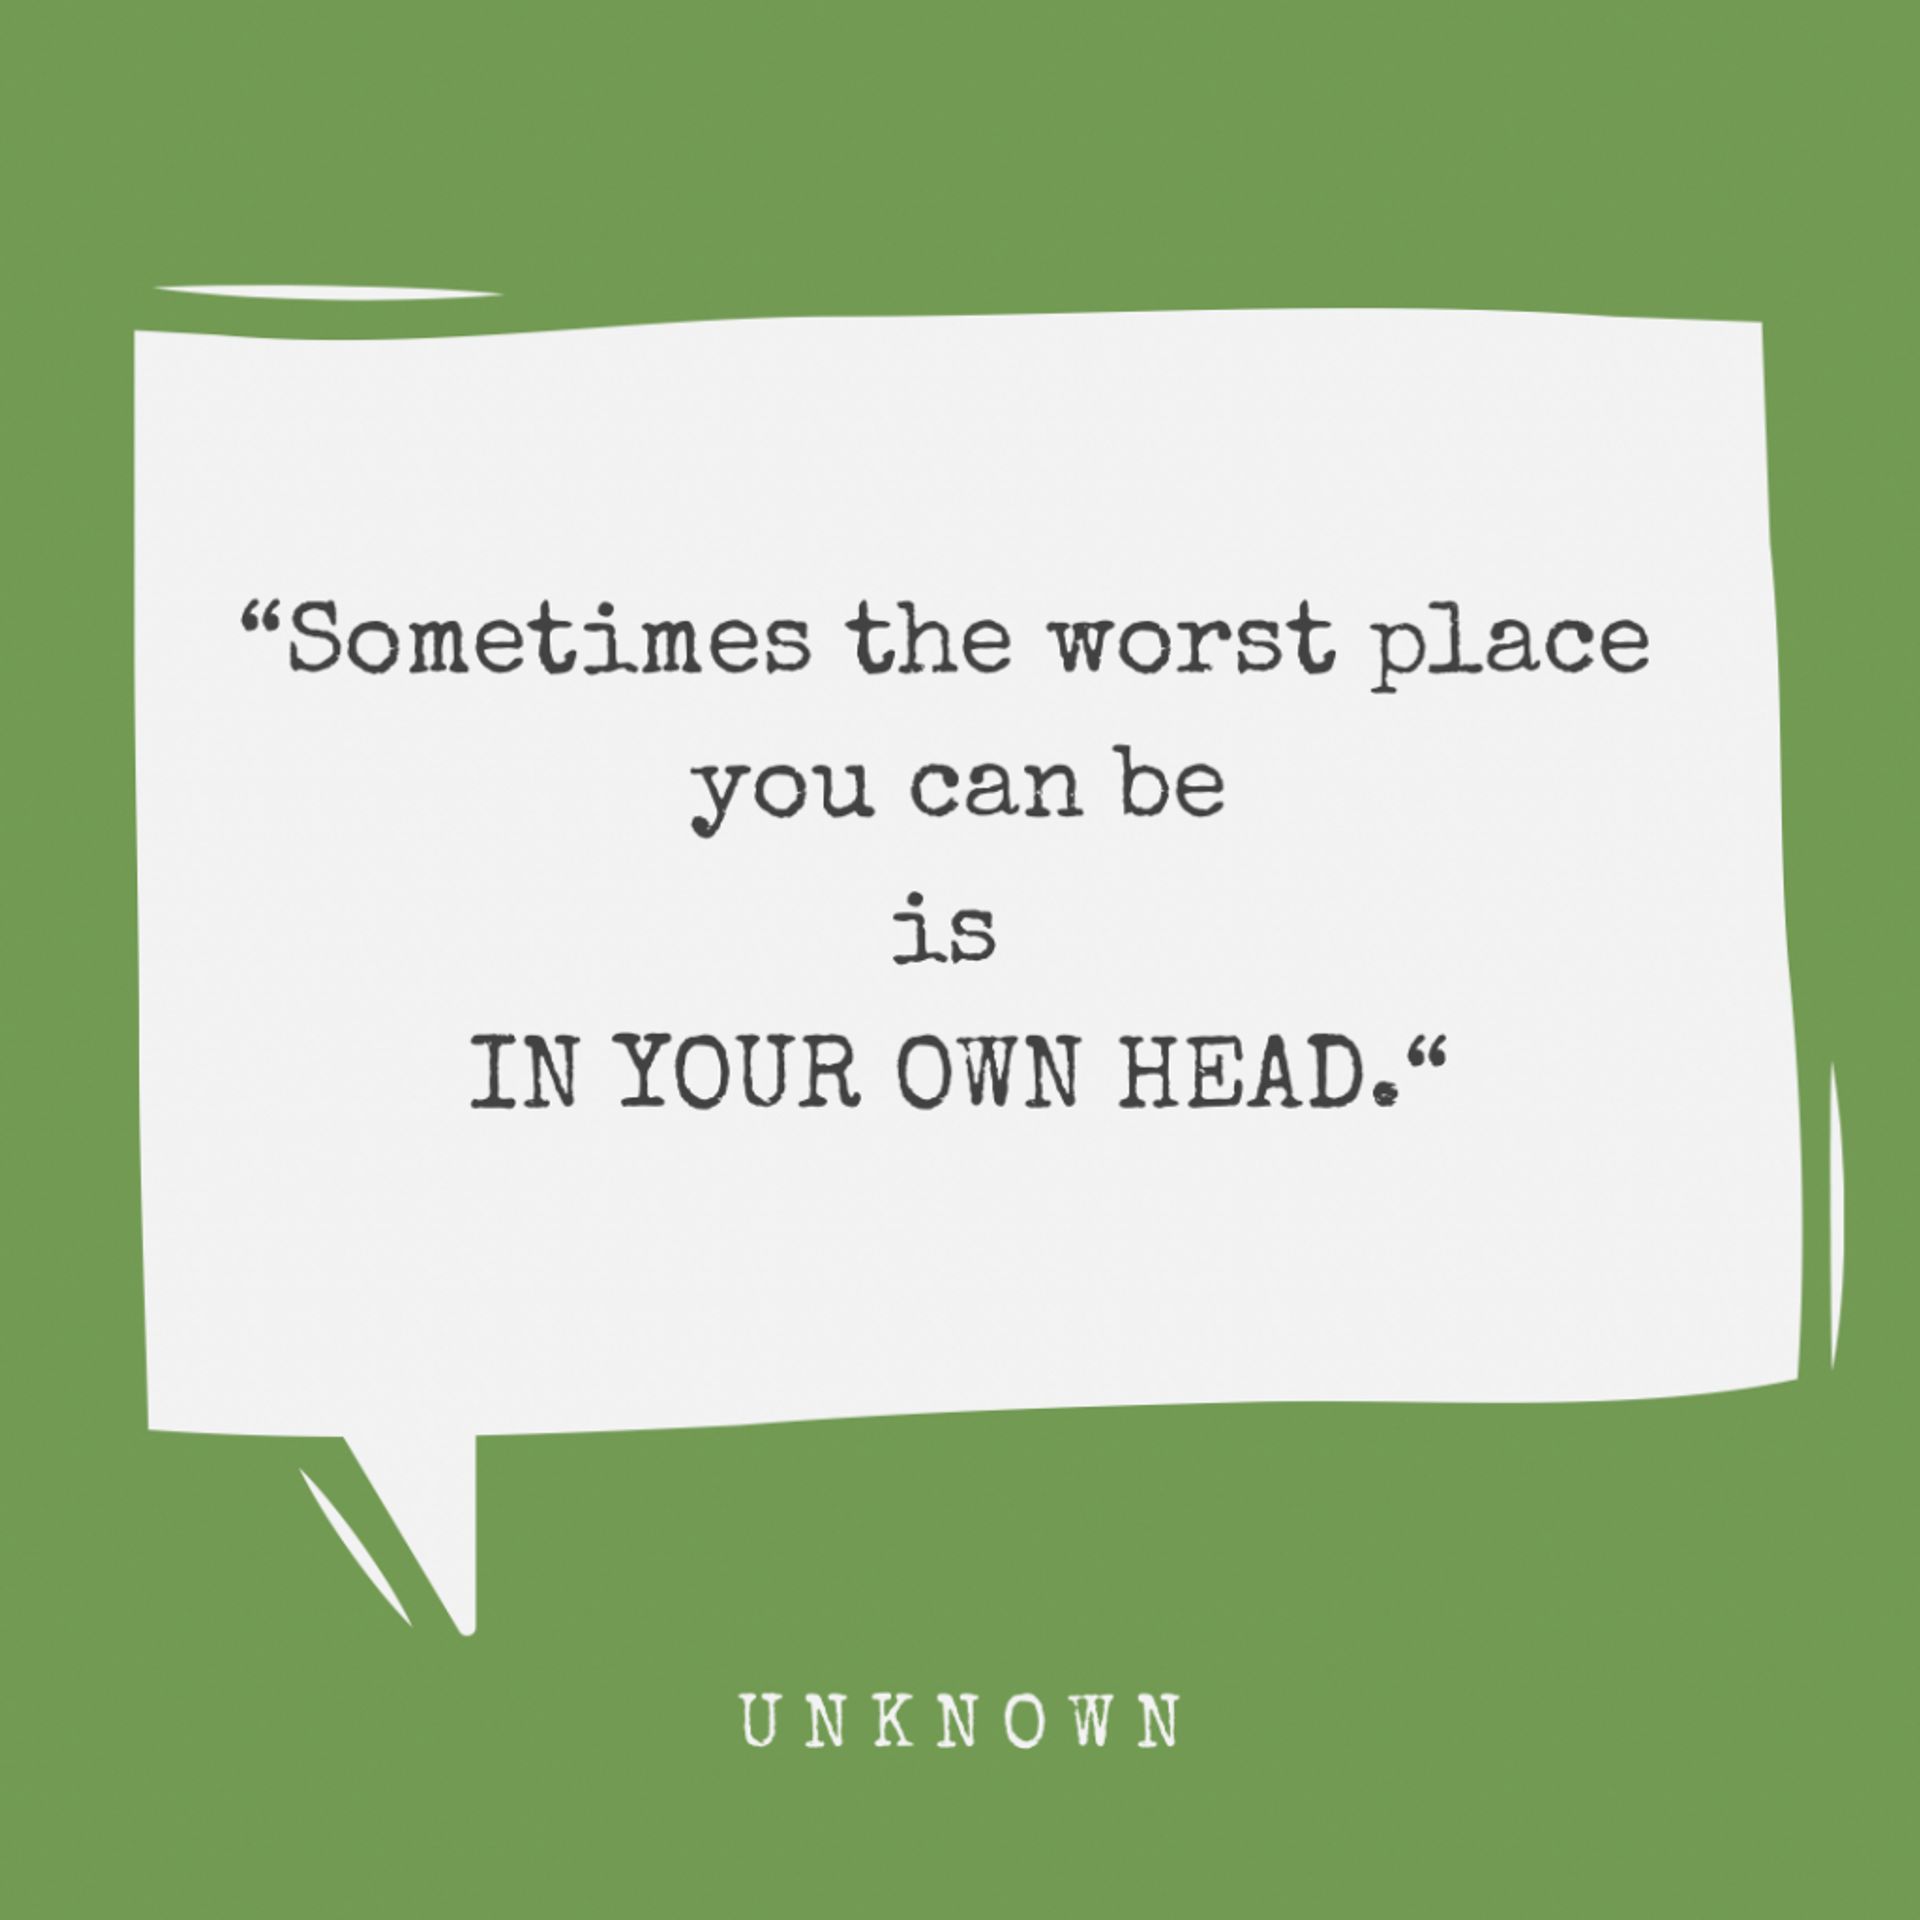 A caption: Sometimes the worst place you can be is in your own head. By an unknown author. 